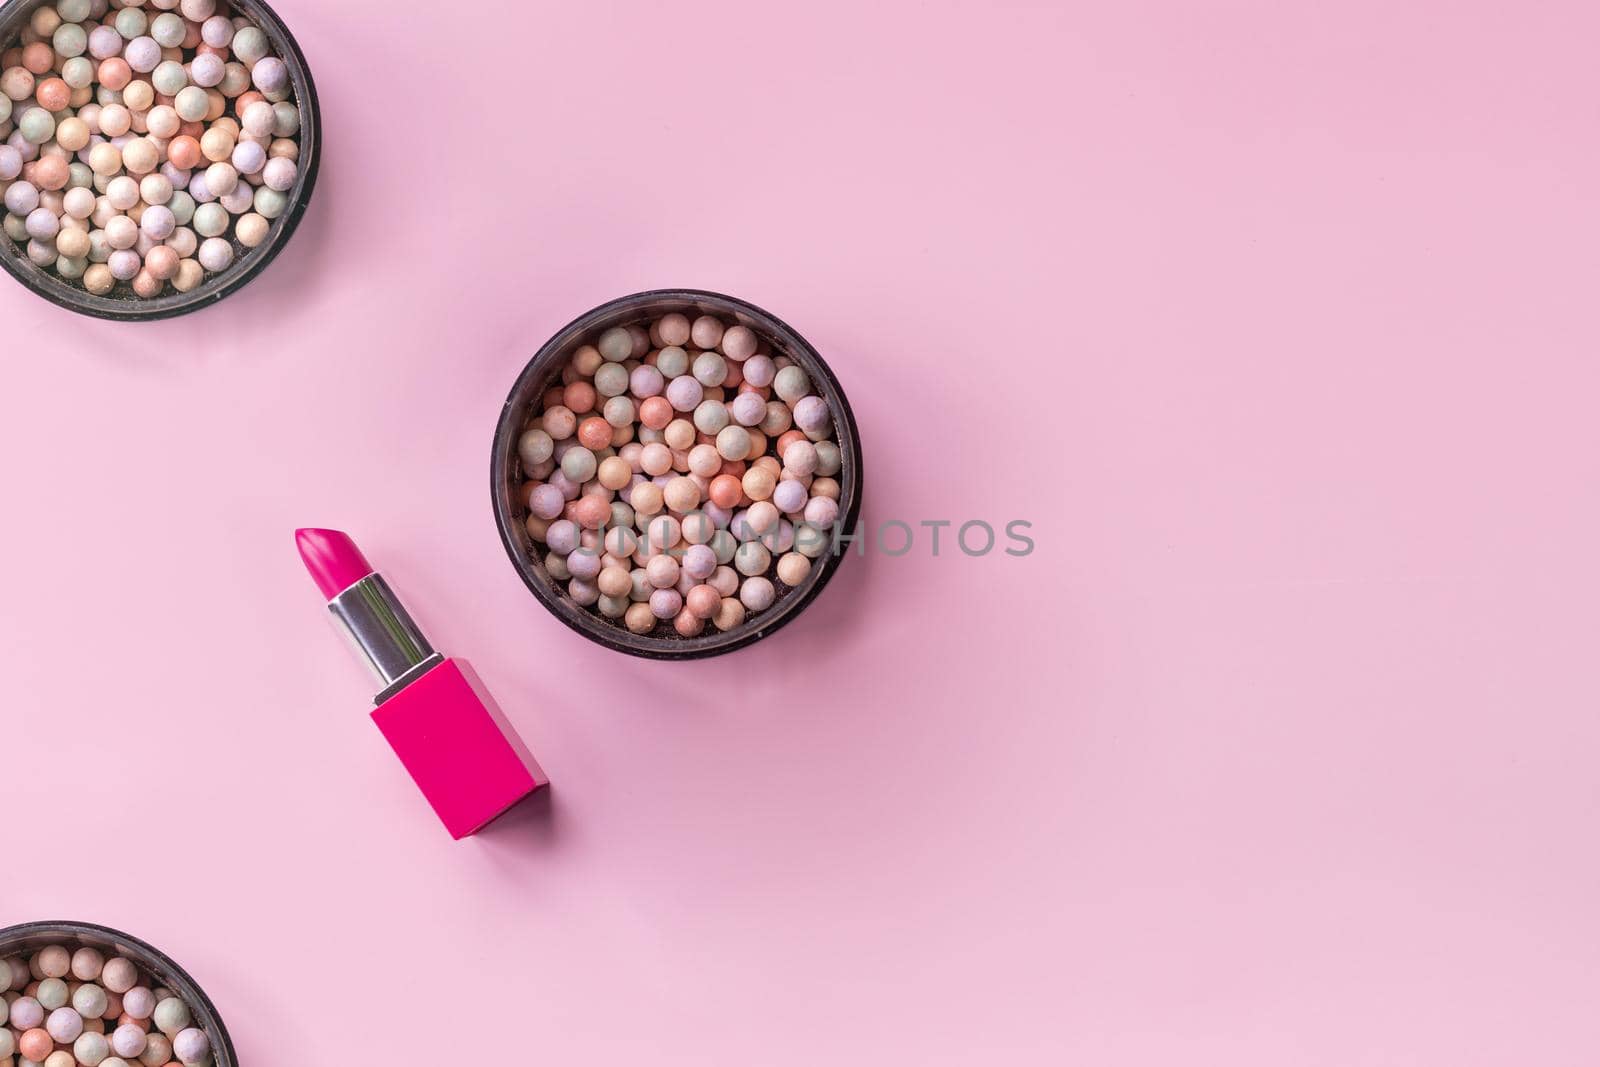 Decorative cosmetics and accessories for makeup on grey background